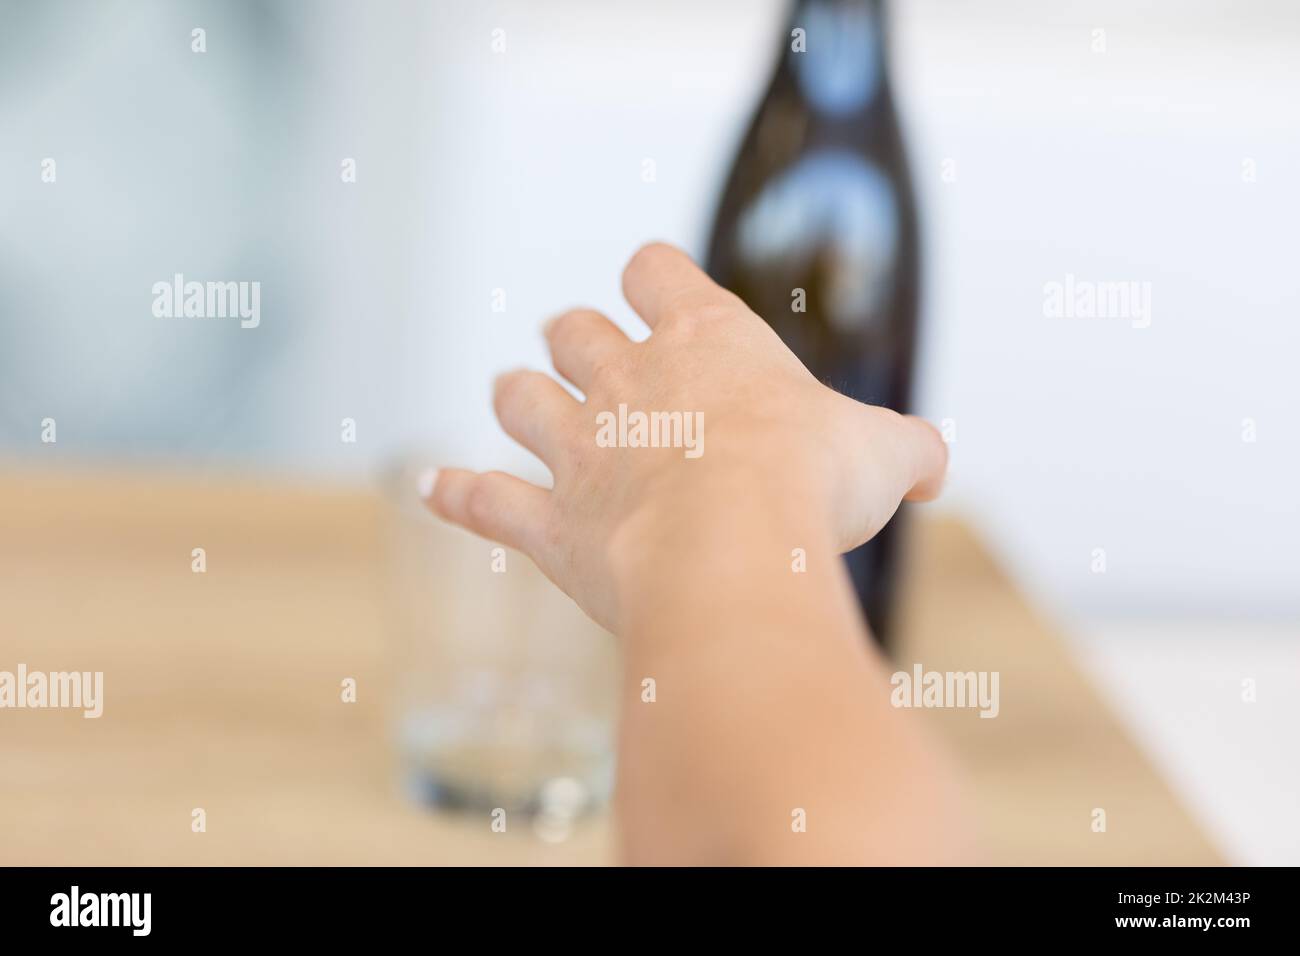 Female hand reaching after bottle Stock Photo